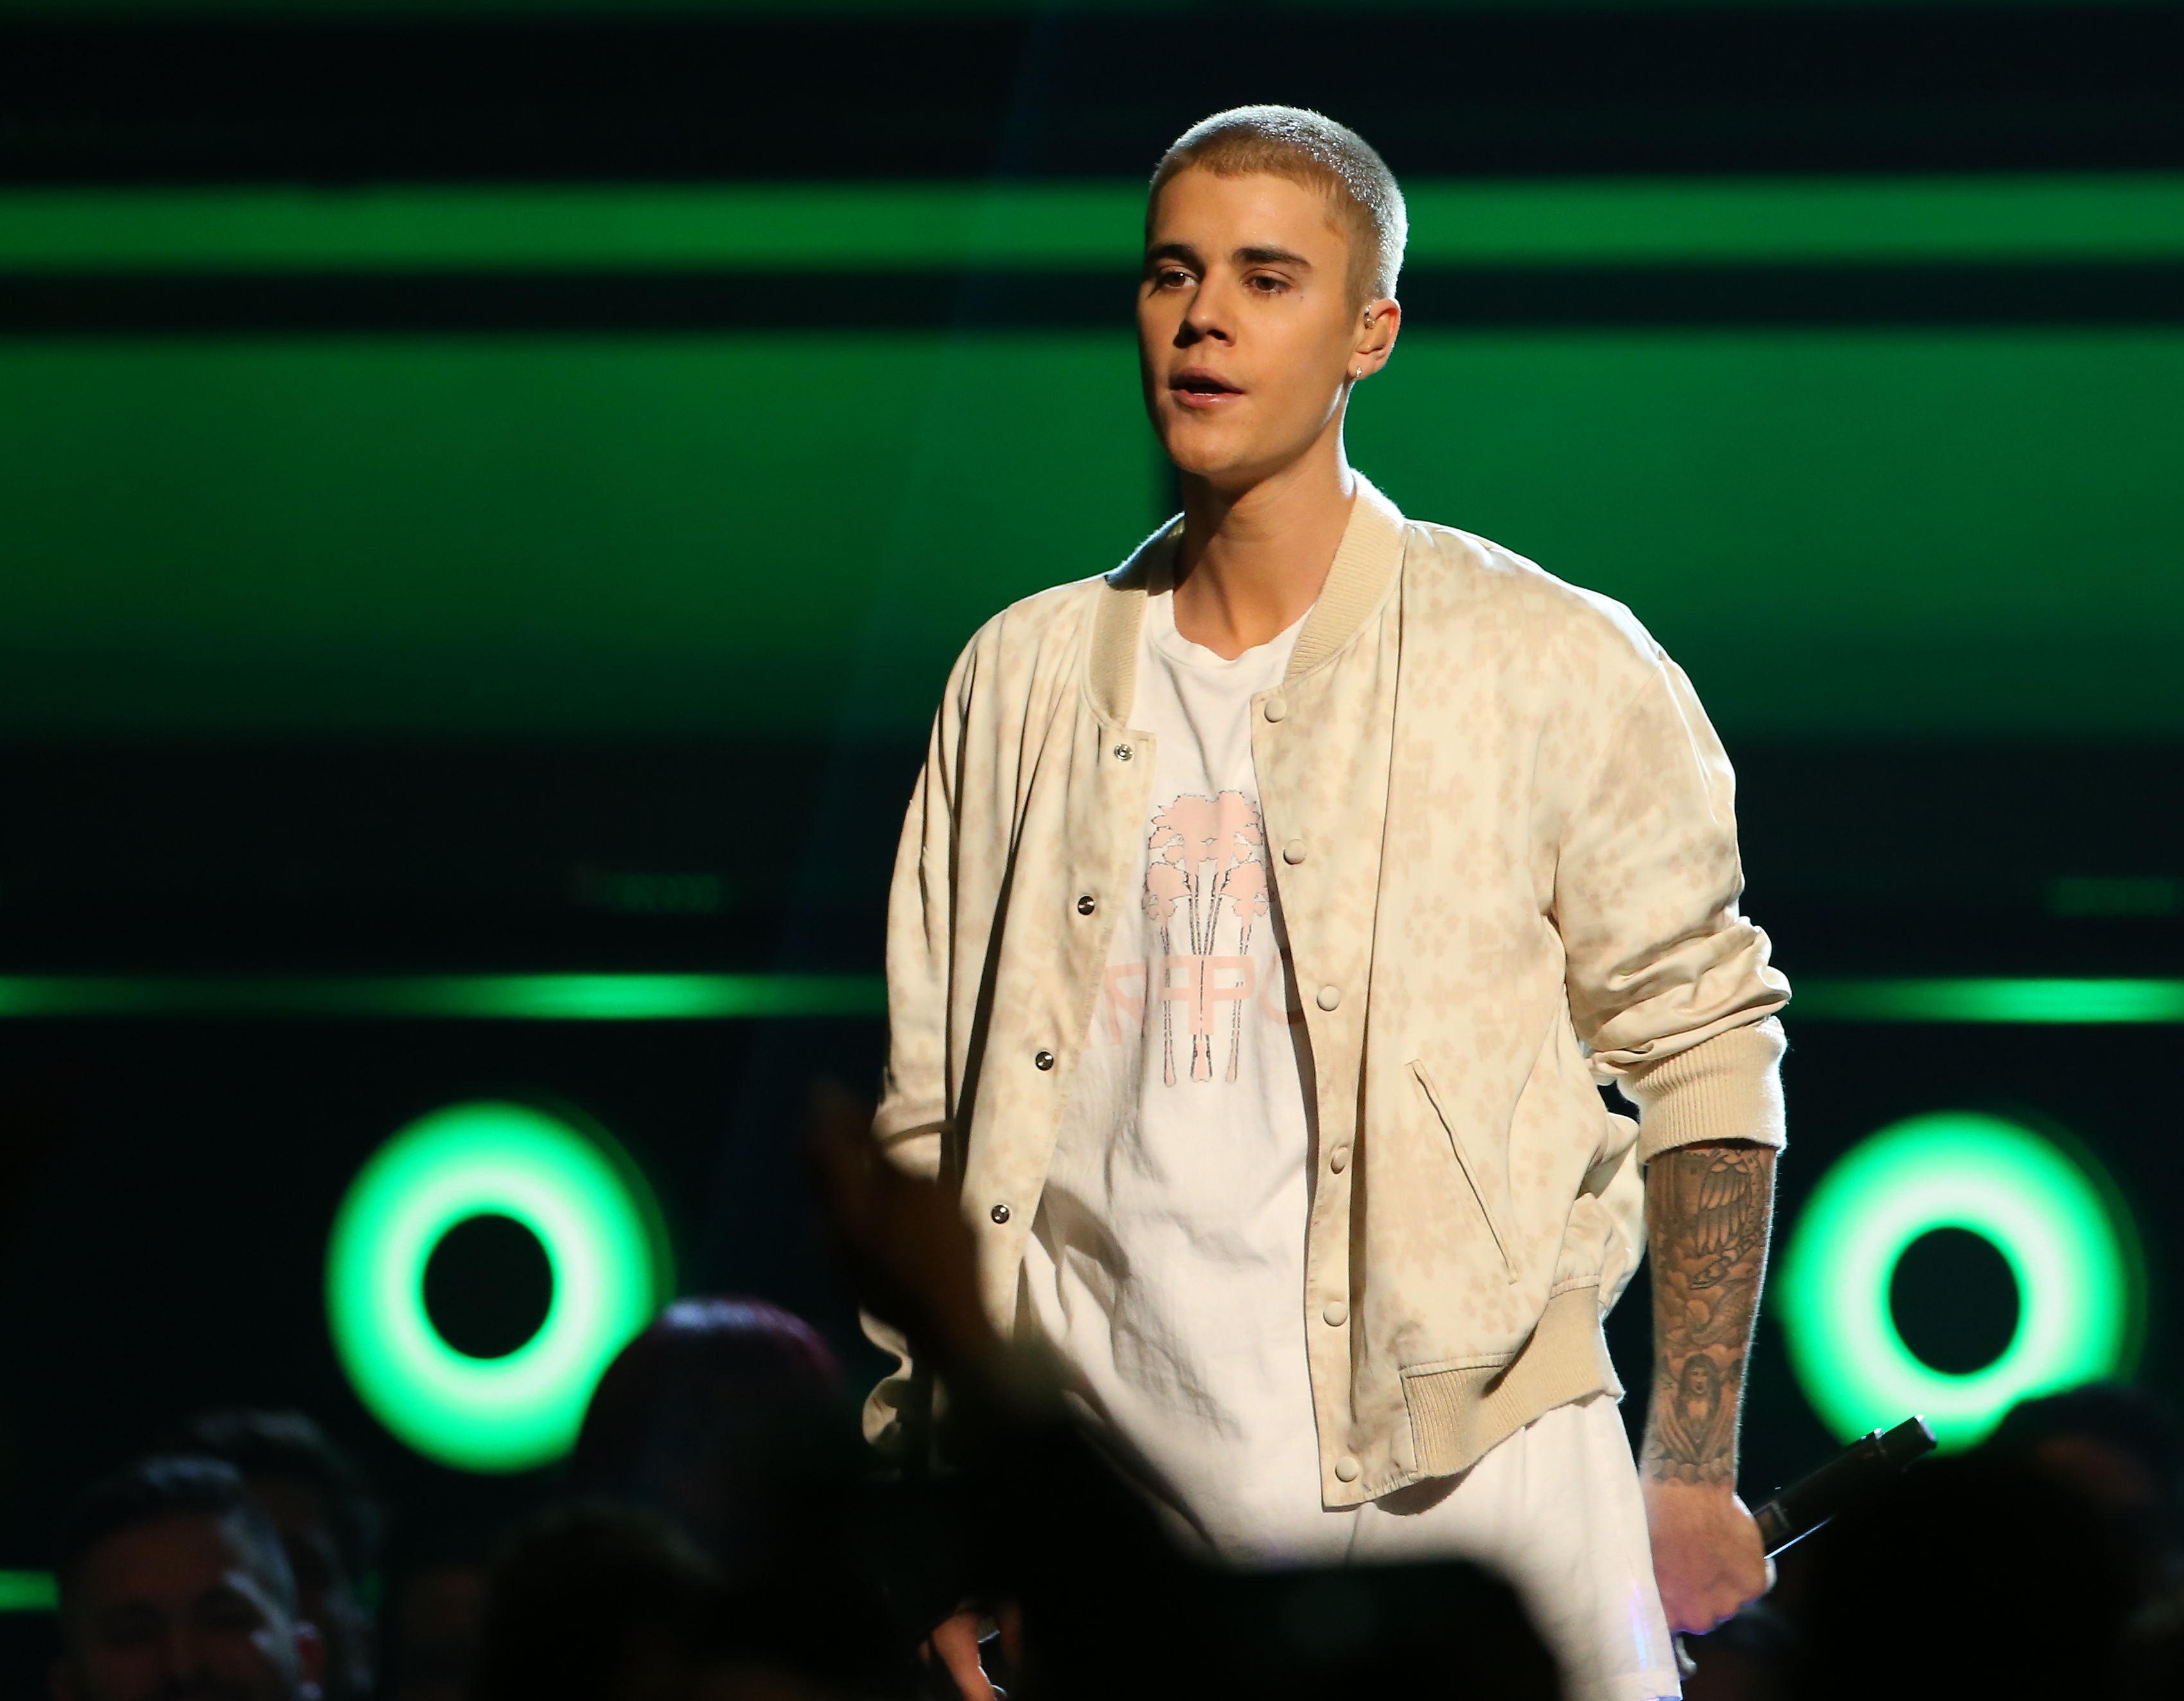 Justin Bieber is seen on stage during the 2016 Billboard Music Awards held at the T-Mobile Arena on May 22, 2016 in Las Vegas, Nevada.JB Lacroix&mdash;WireImage (JB Lacroix&mdash;WireImage)